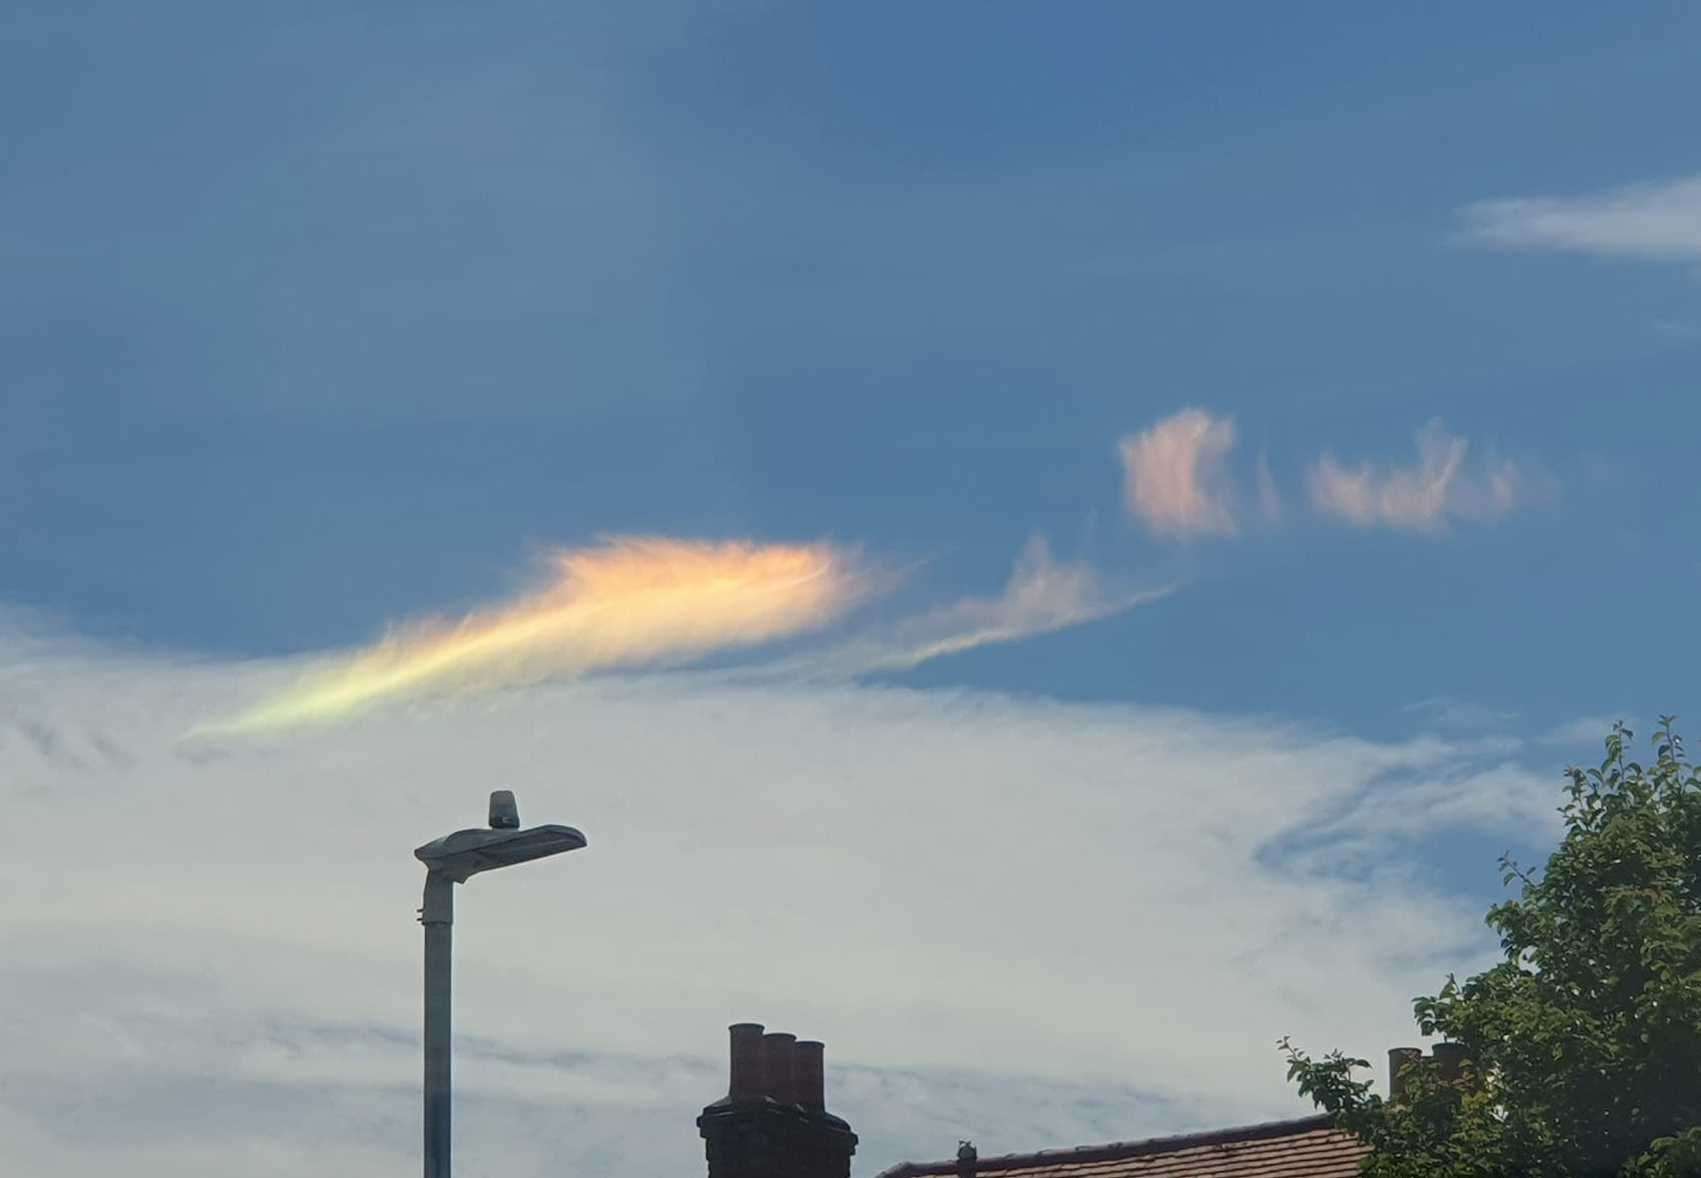 'Fire rainbows', as seen in Folkestone, happen when sunlight bounces off ice crystals in the atmosphere. Picture: Mishi Millward